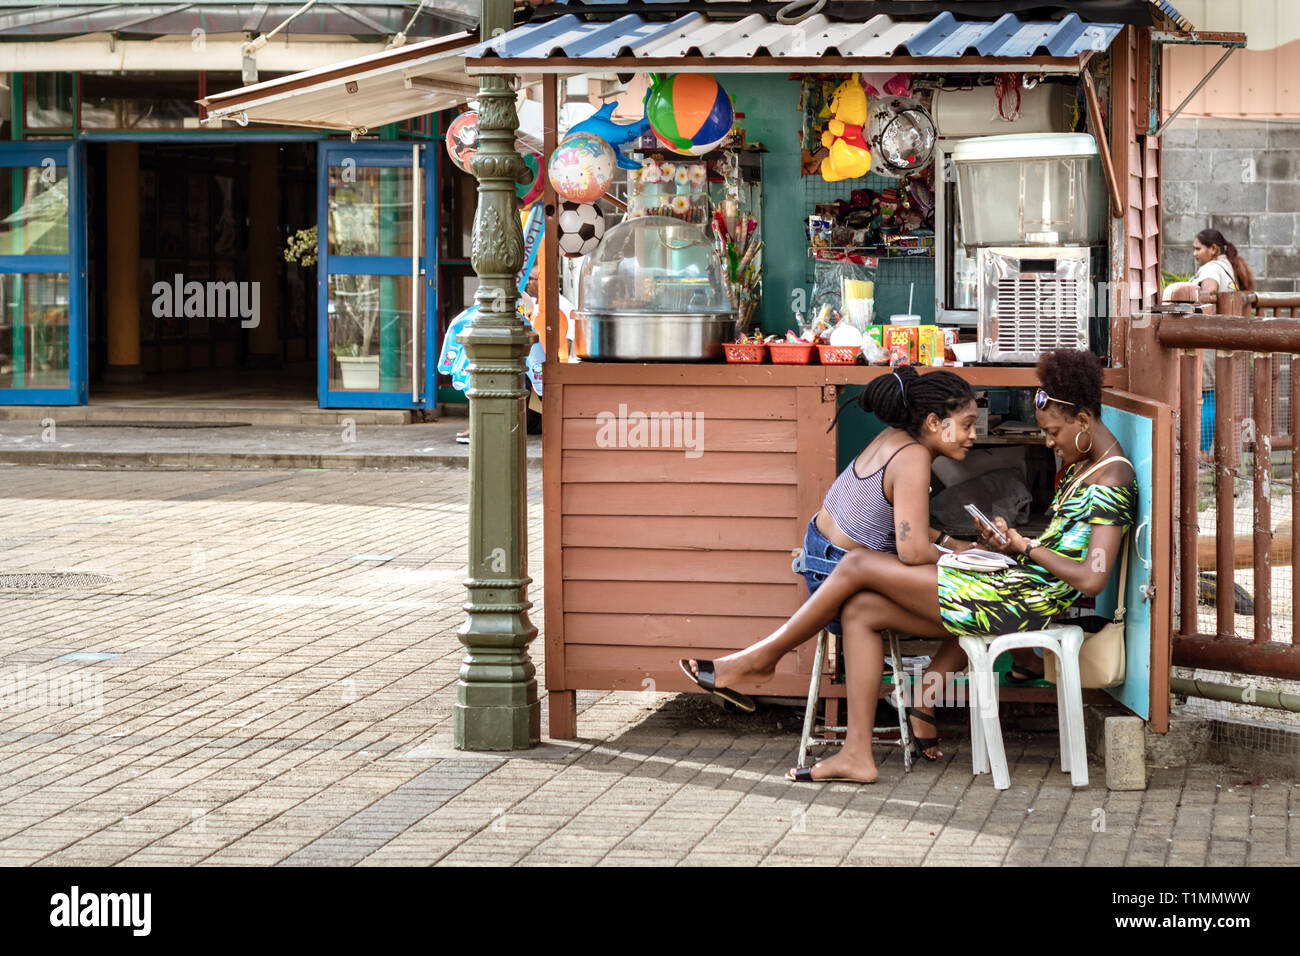 Port Louis, Mauritius - January 29, 2019: Two women talking sitting next to their stall store at the Central Market in Port Louis, Mauritius. Stock Photo